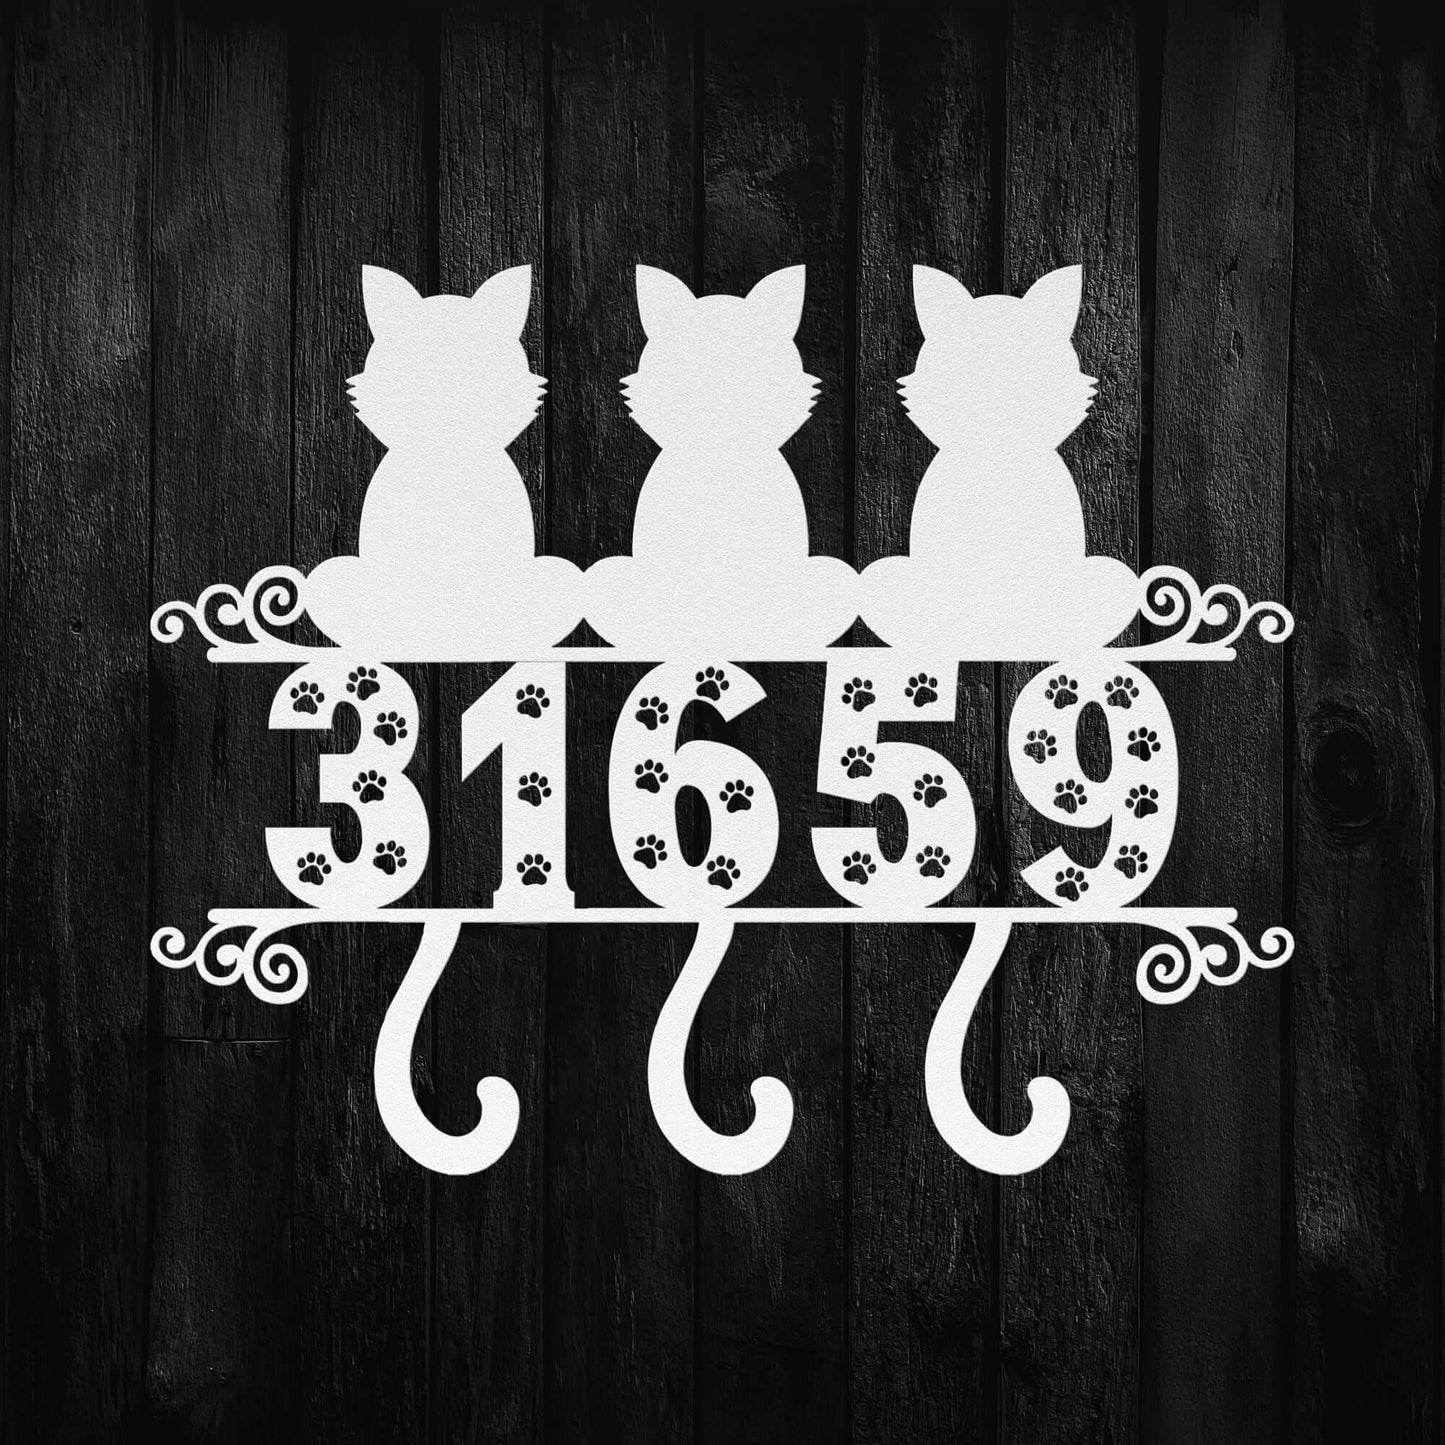 Personalized House Number Plaque, Cat Address Sign